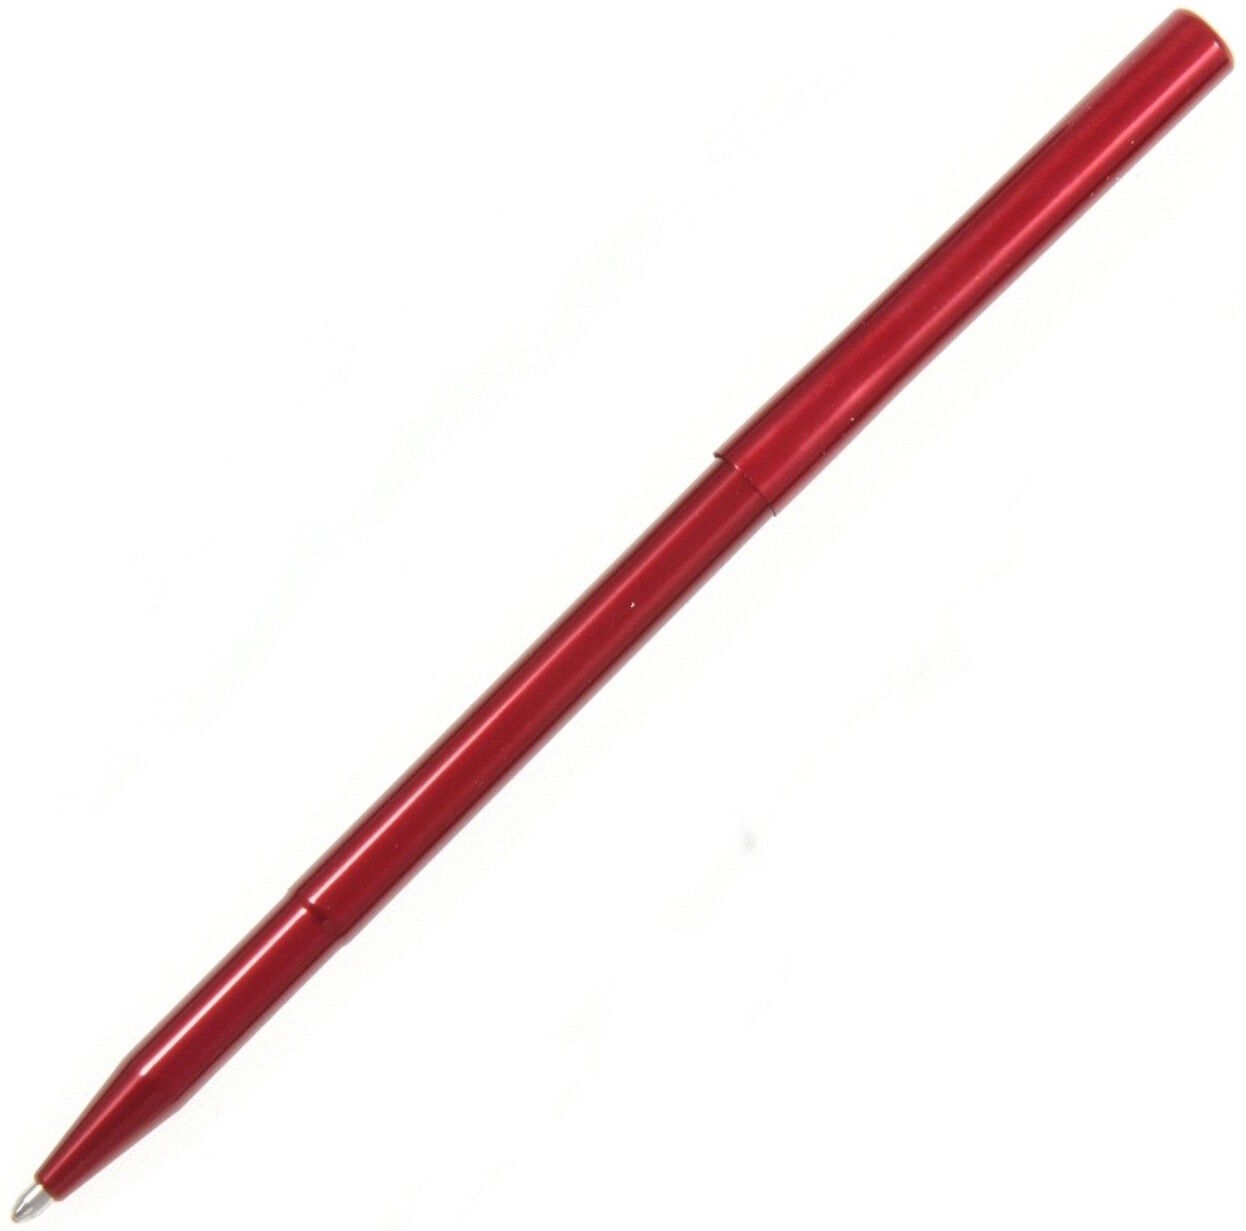 Fisher Space Pen - Stowaway Ballpoint Pen - Red Anodized Aluminum  SWY-RED